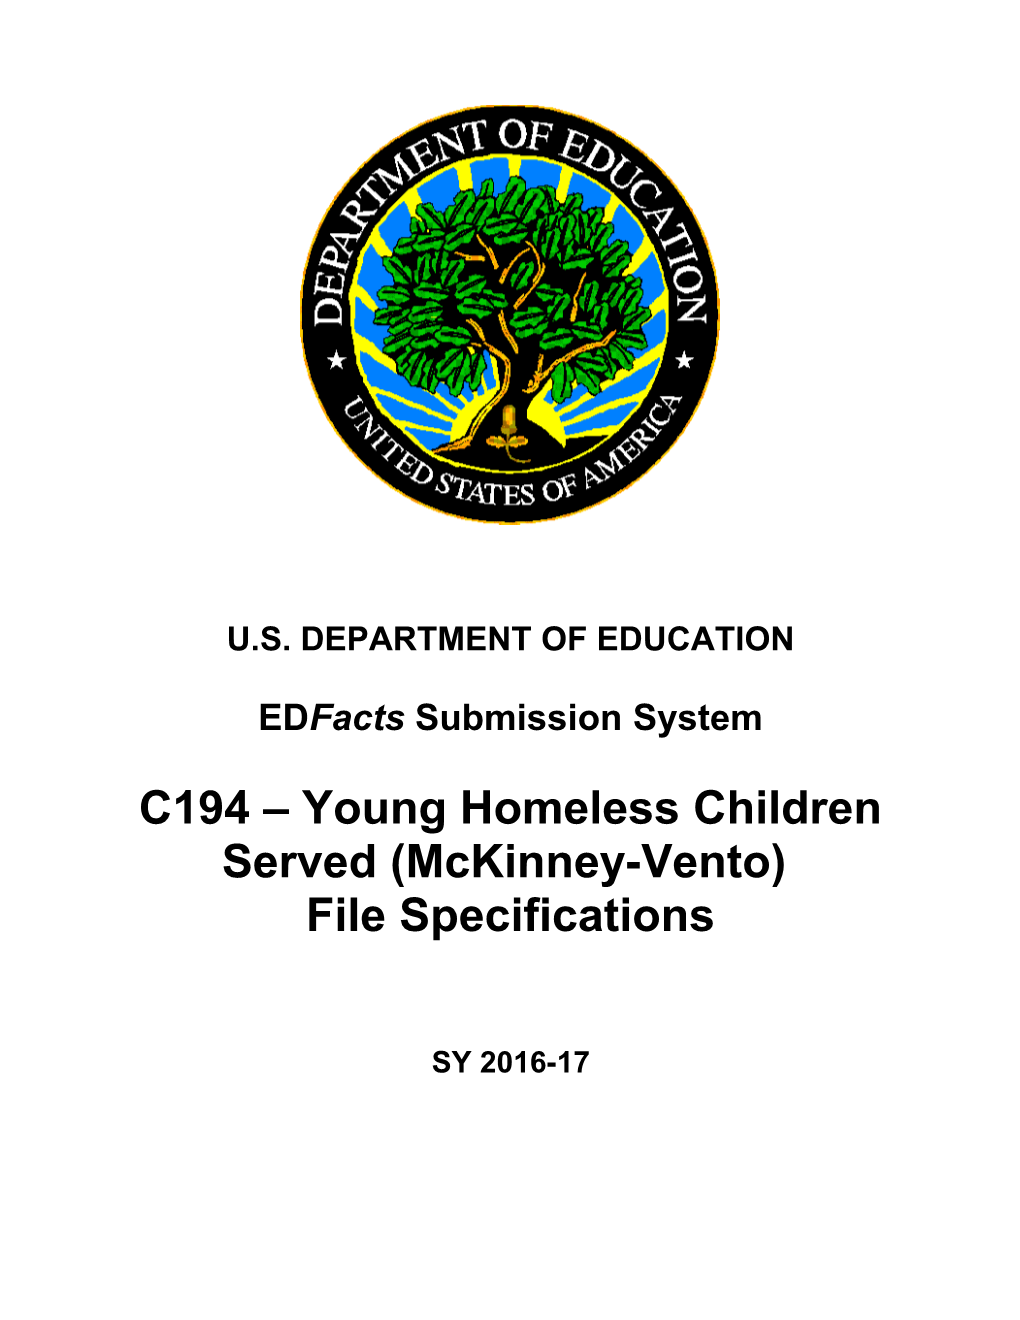 C194 Young Homeless Children Served (Mckinney-Vento) File Specifications (Msword)